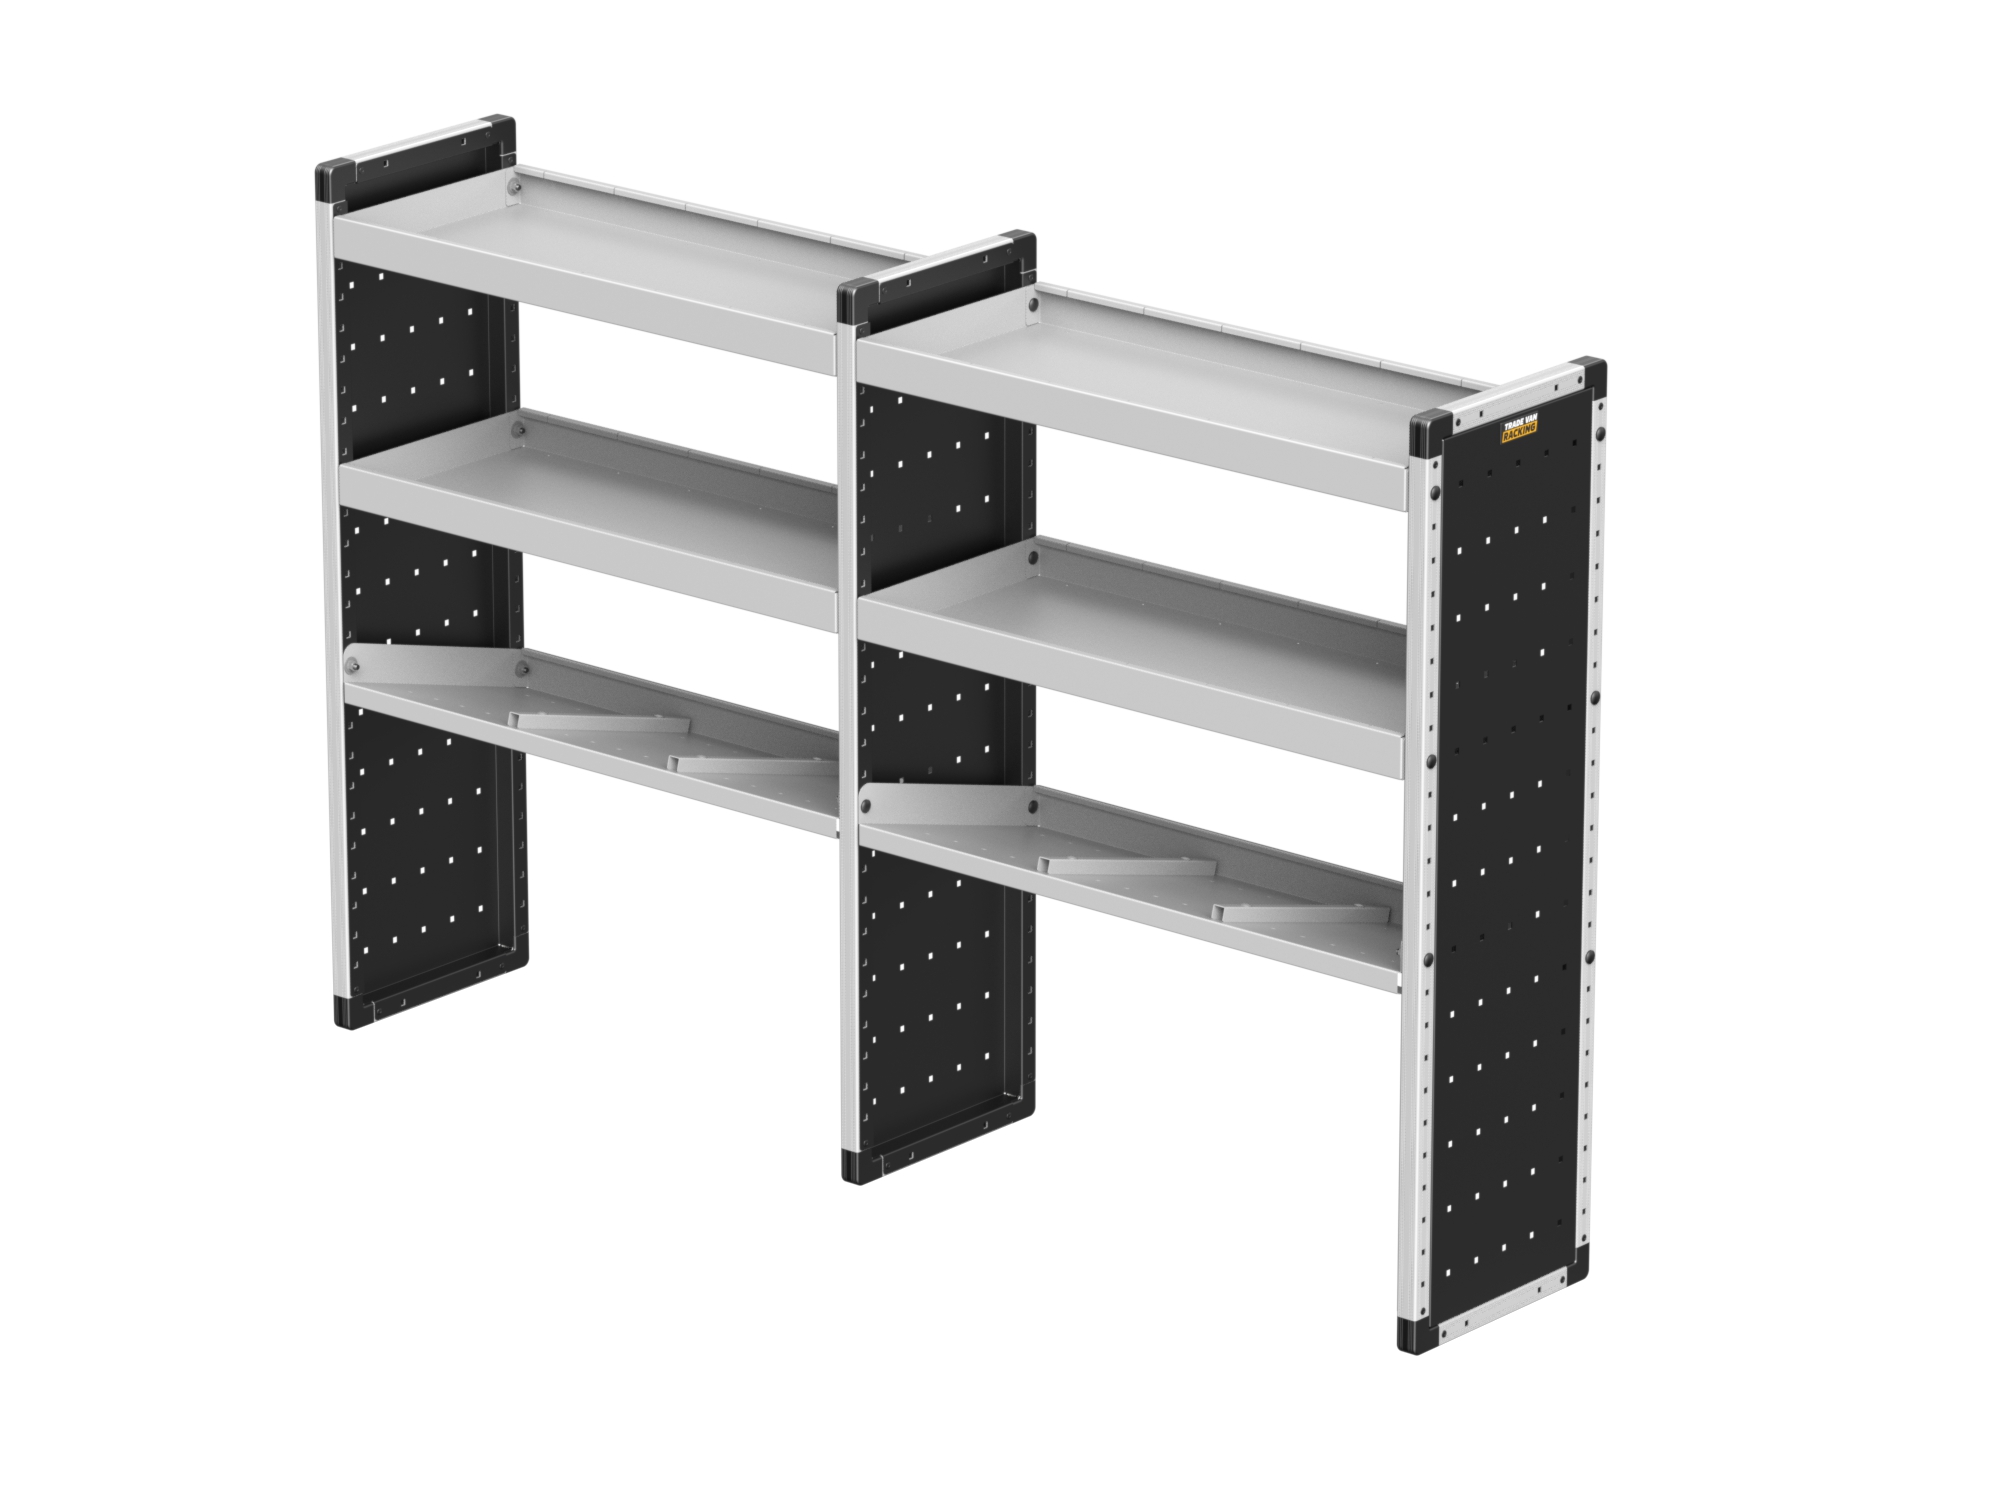 Trade Van Racking - Double Unit - 2 straight & 1 angled per bay - TVR-DBL-010